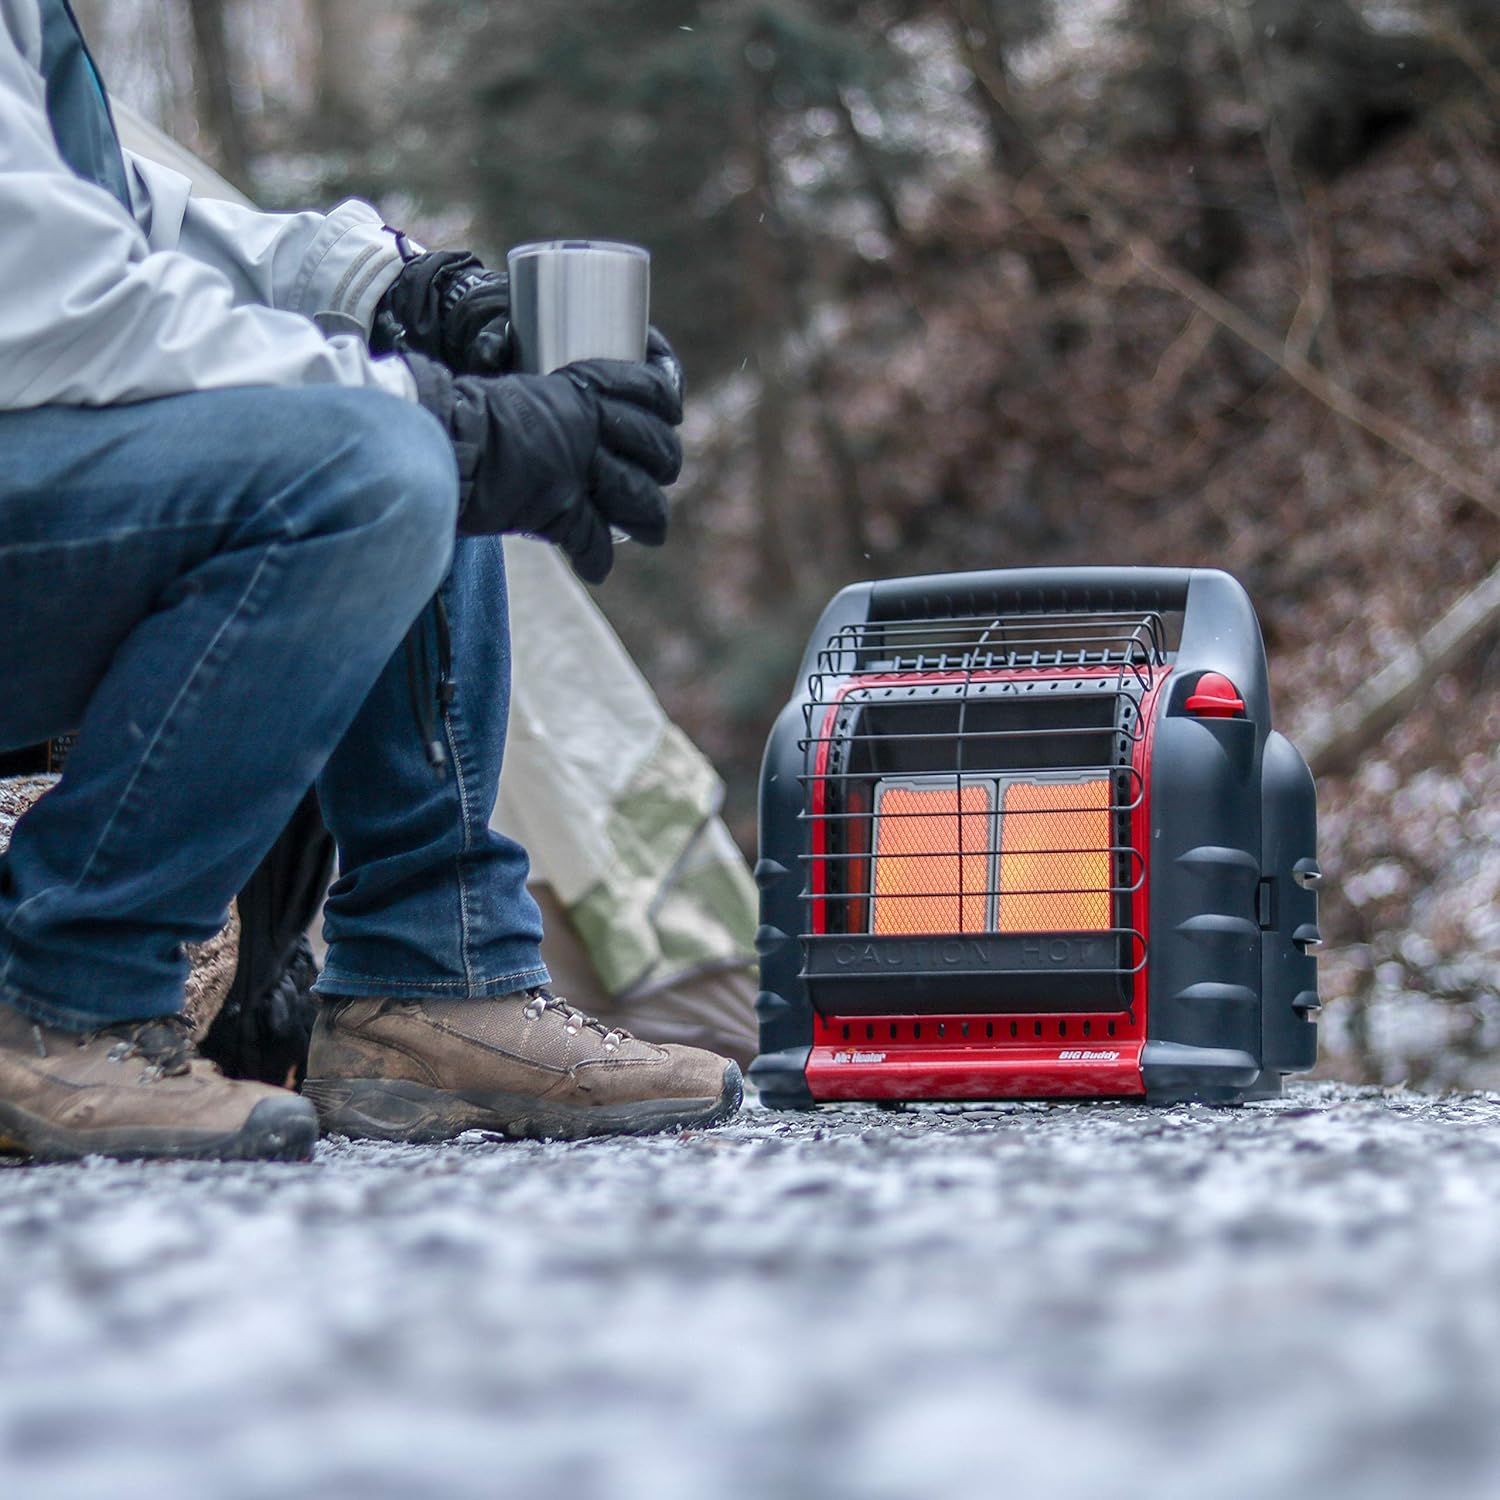 18,000 BTU Big Buddy Portable Propane Heater (No Fan),Red, Tip-over Protection|Low-Oxygen Safety Shutoff|Portable - 18,000 BTU Big Buddy Portable Propane Heater Review